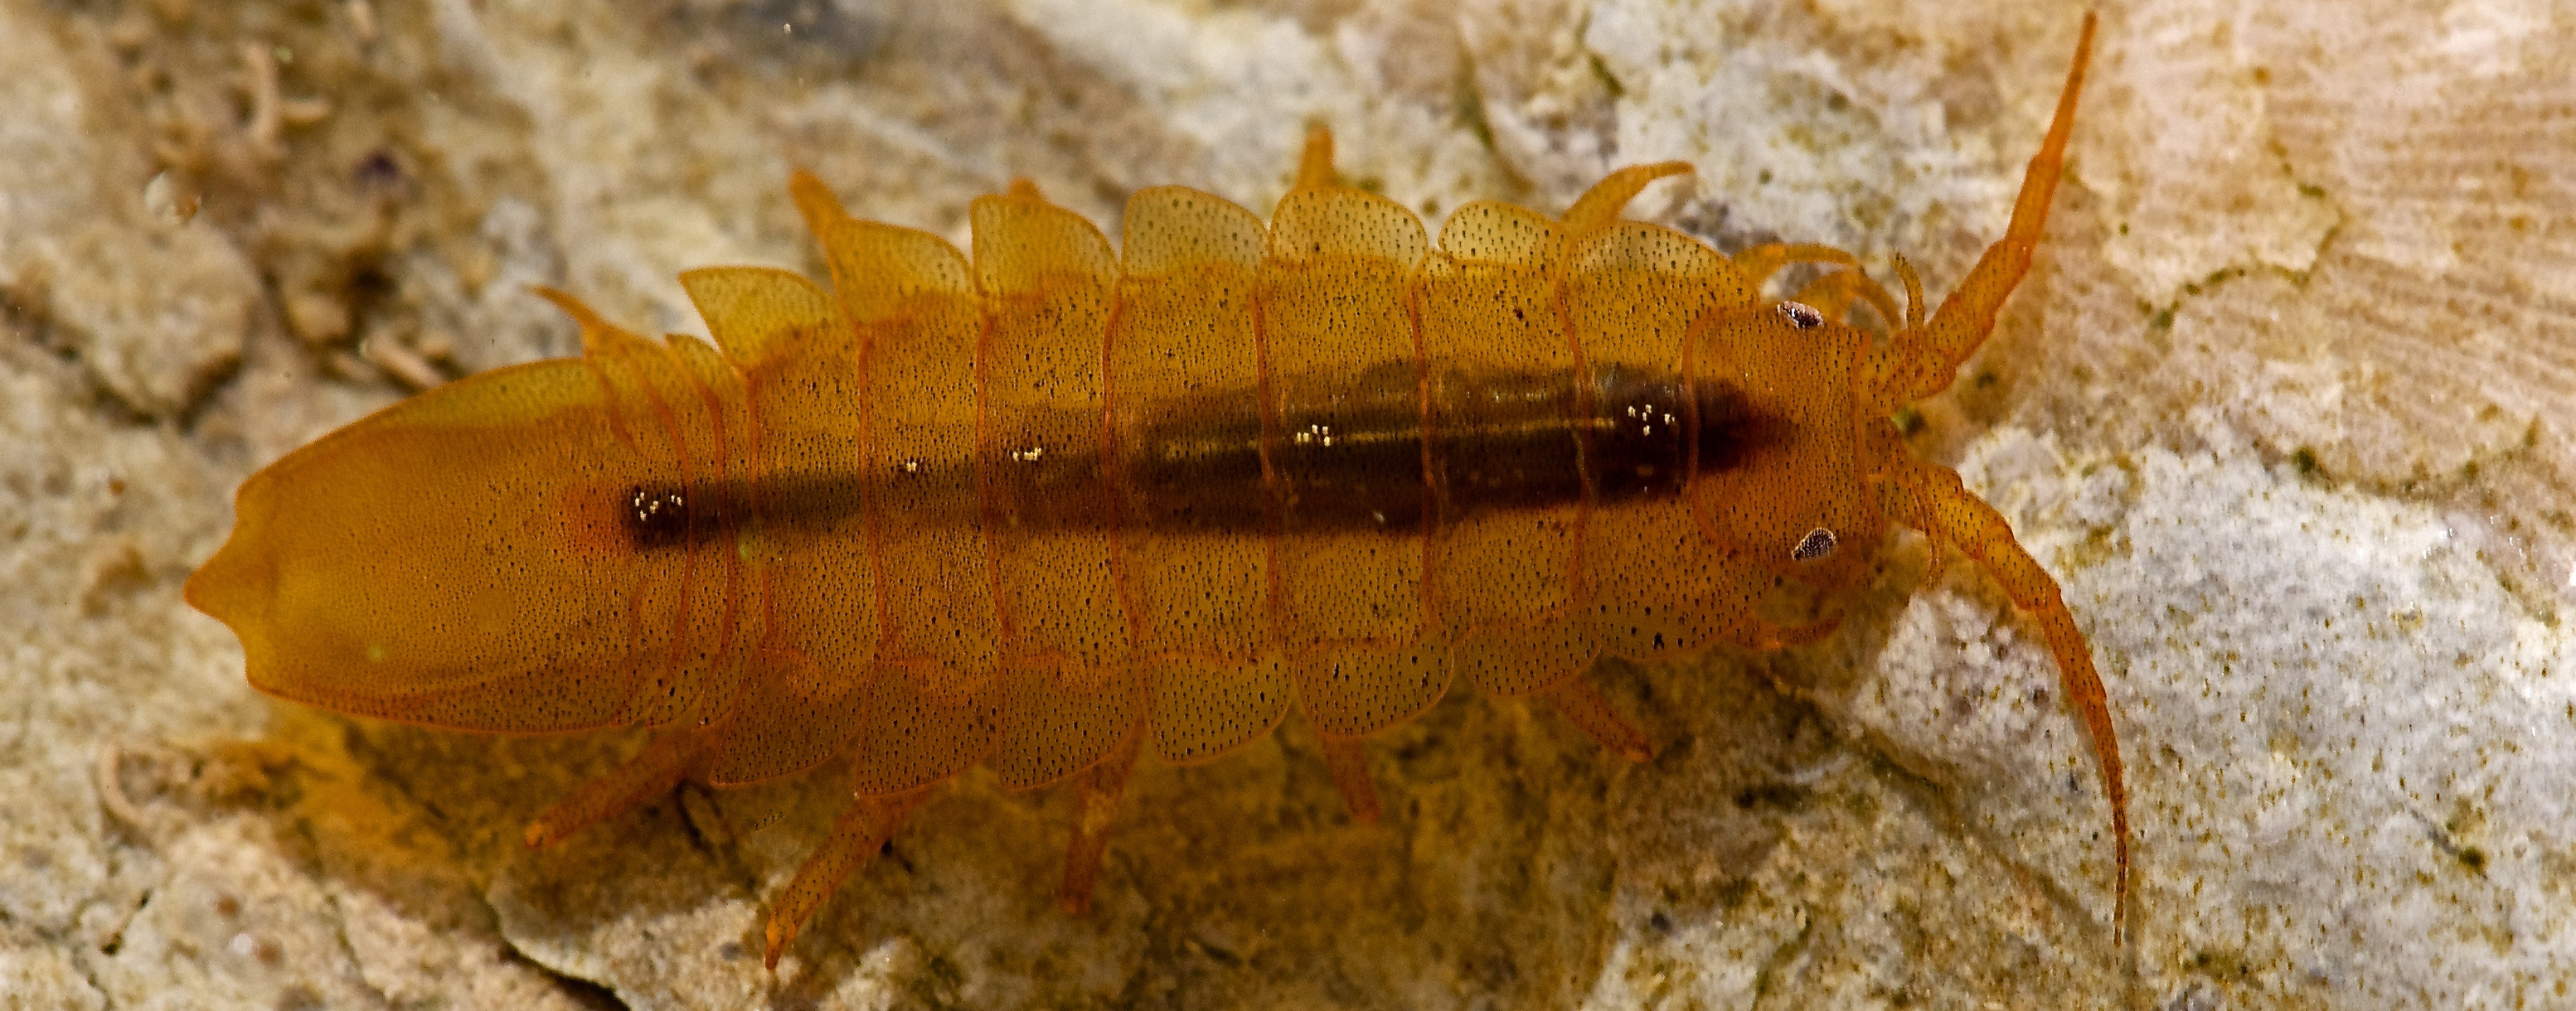 Saduria entomon – one of the marine species living in the Baltic Sea. Photo: Tiit Hunt